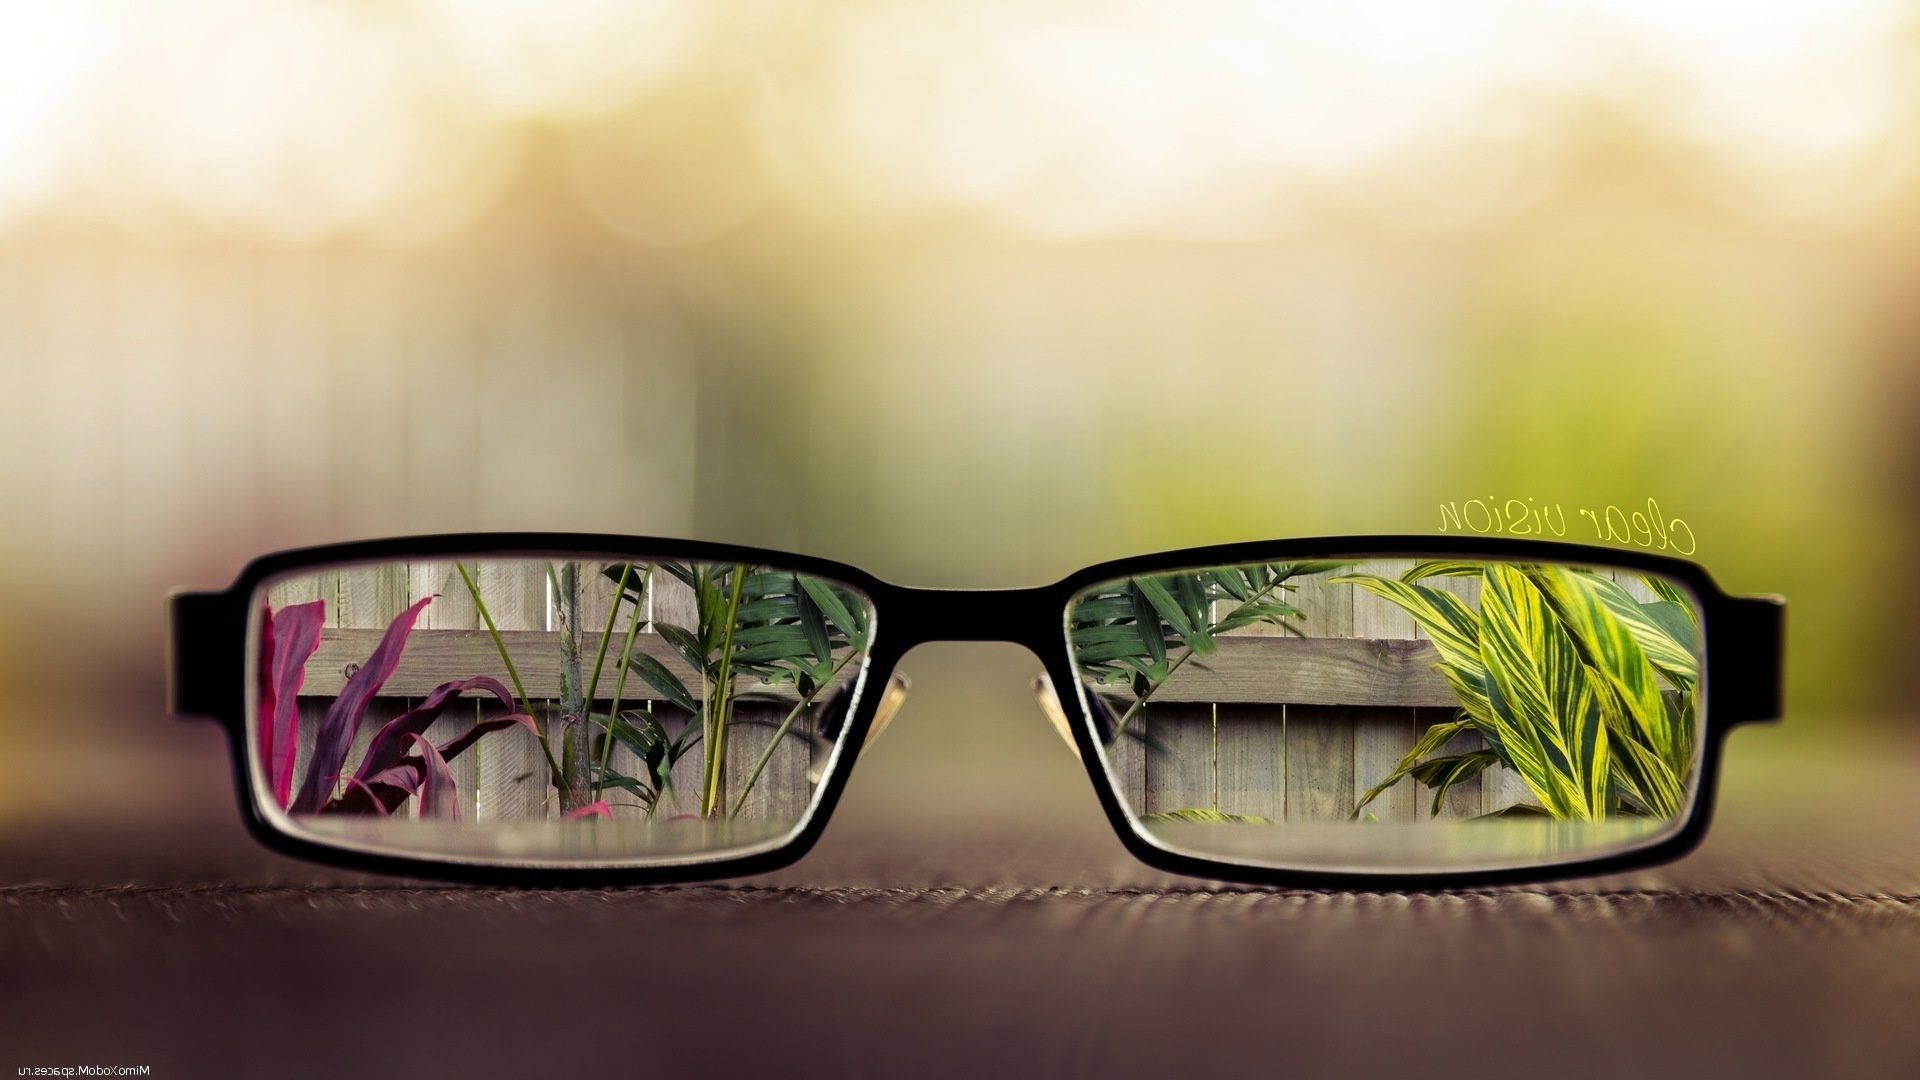 Glasses Wallpapers